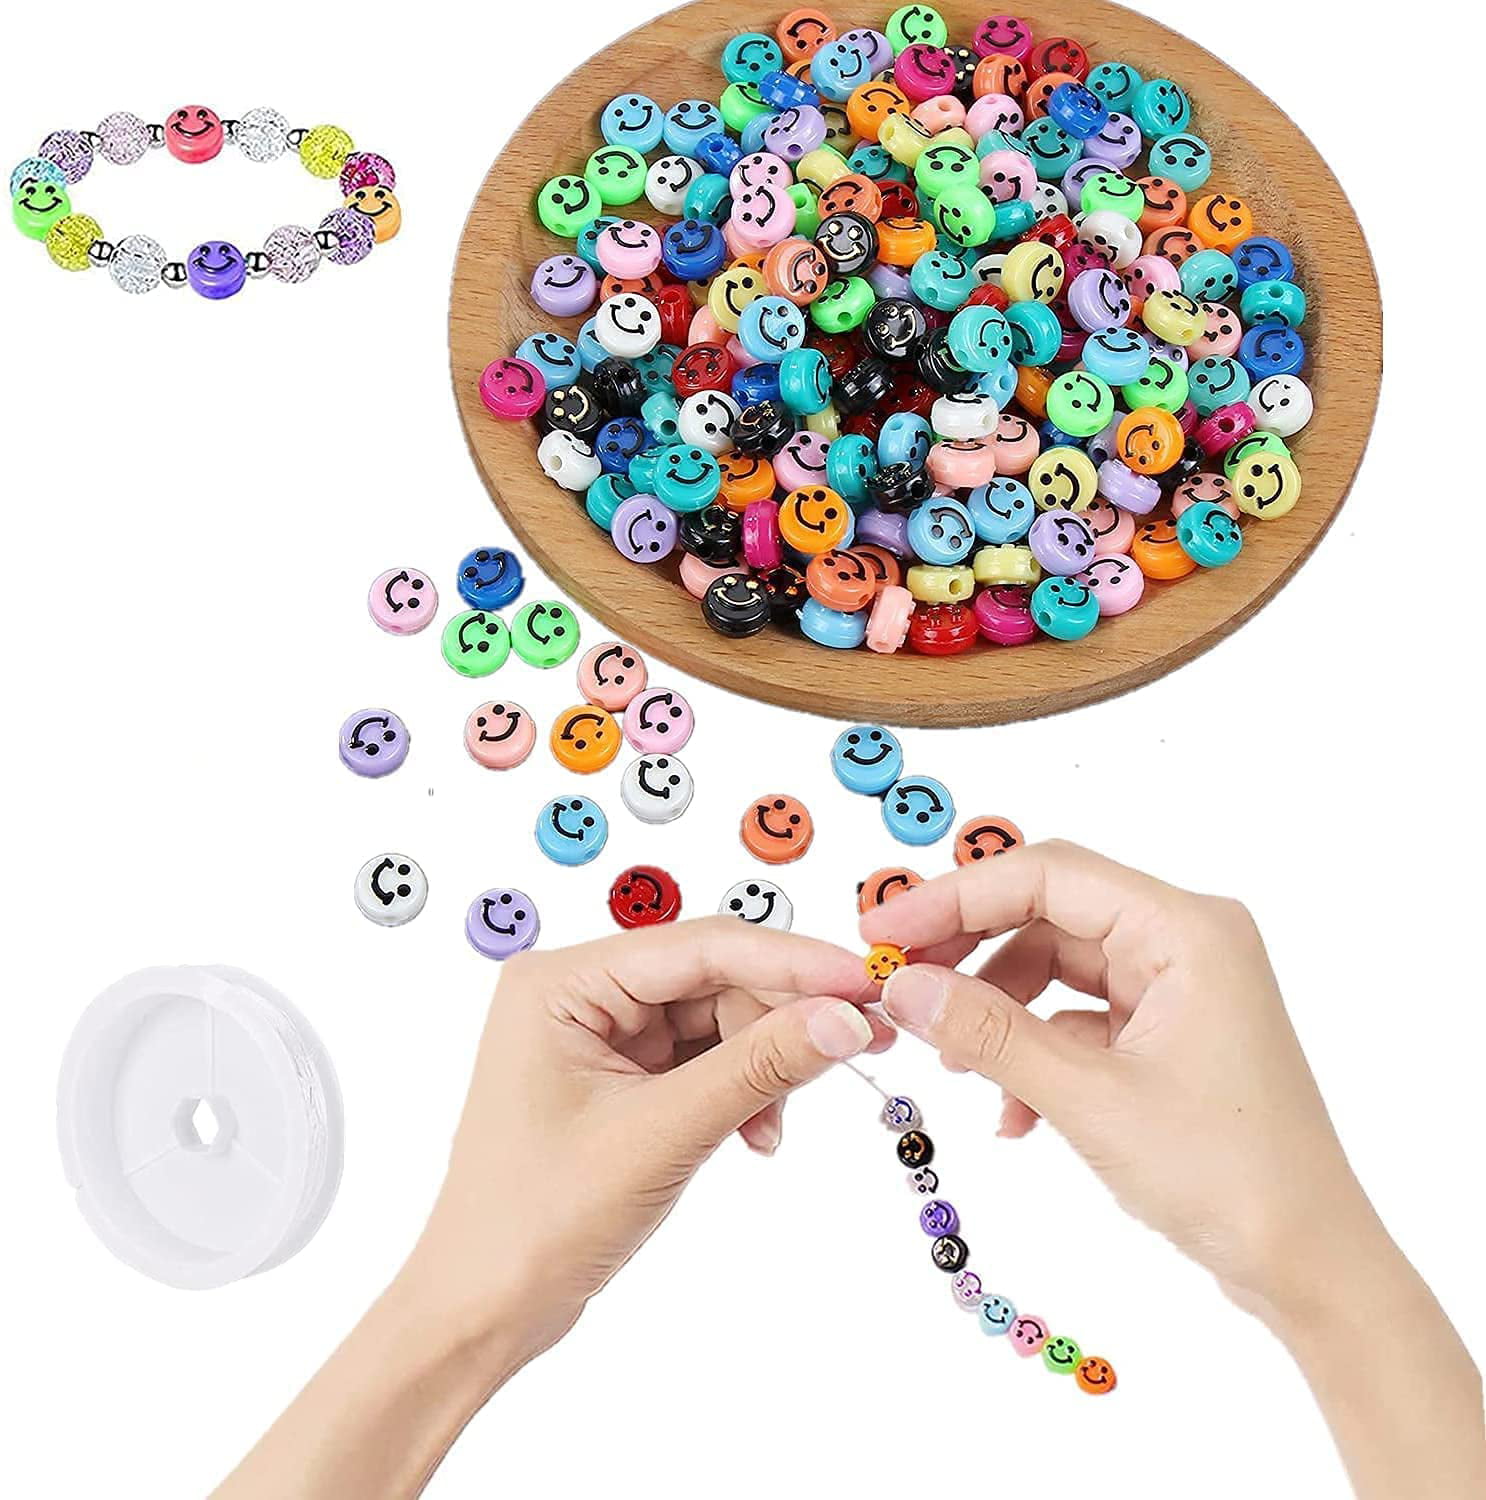 Arts and Craft 100 Pcs Smiley Face Beads Acrylic Happy Face for Bracelet Making 